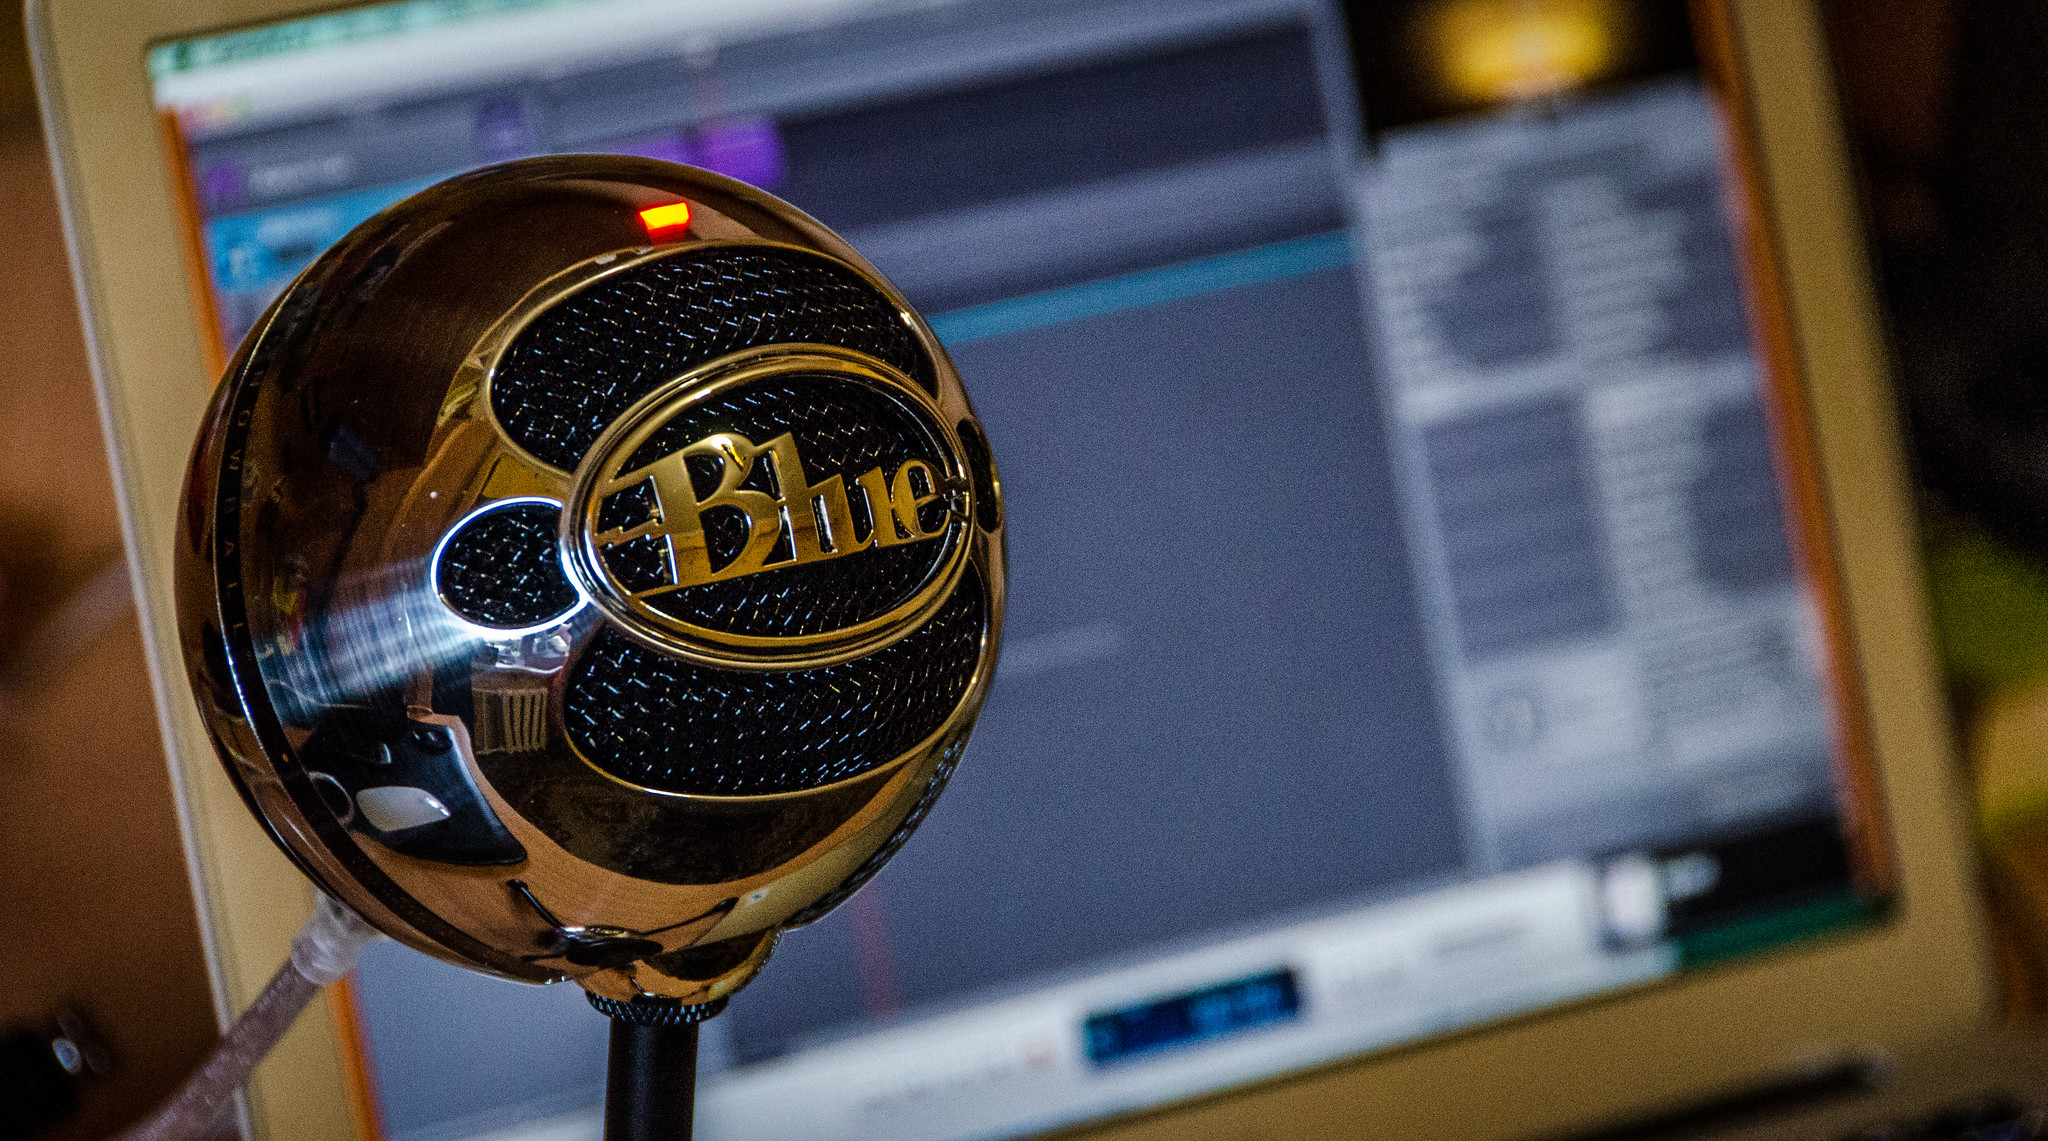 The Blue Snowball microphone.